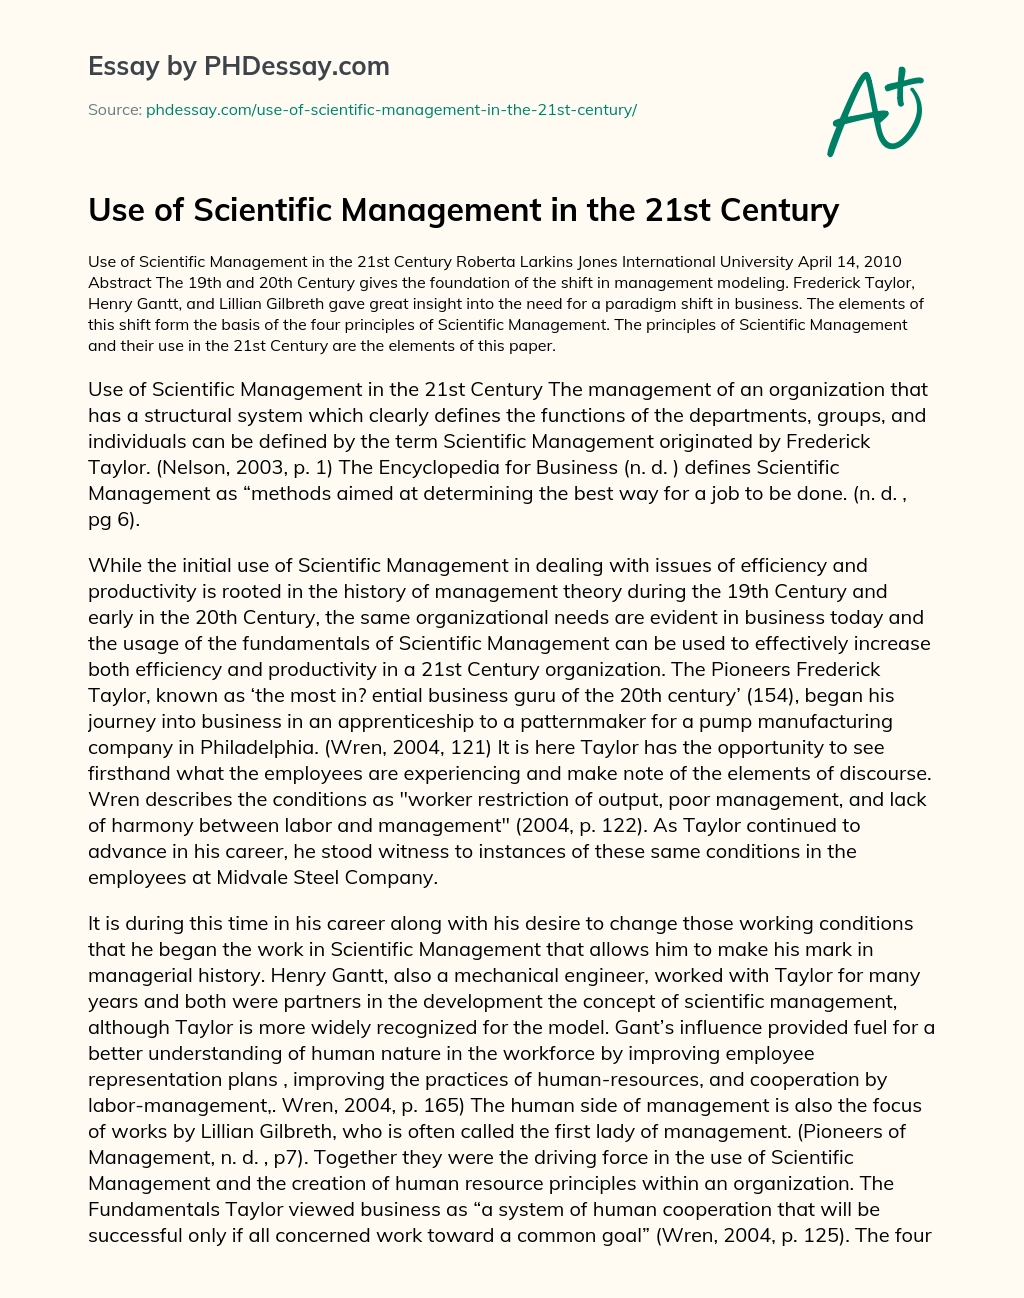 Use of Scientific Management in the 21st Century essay